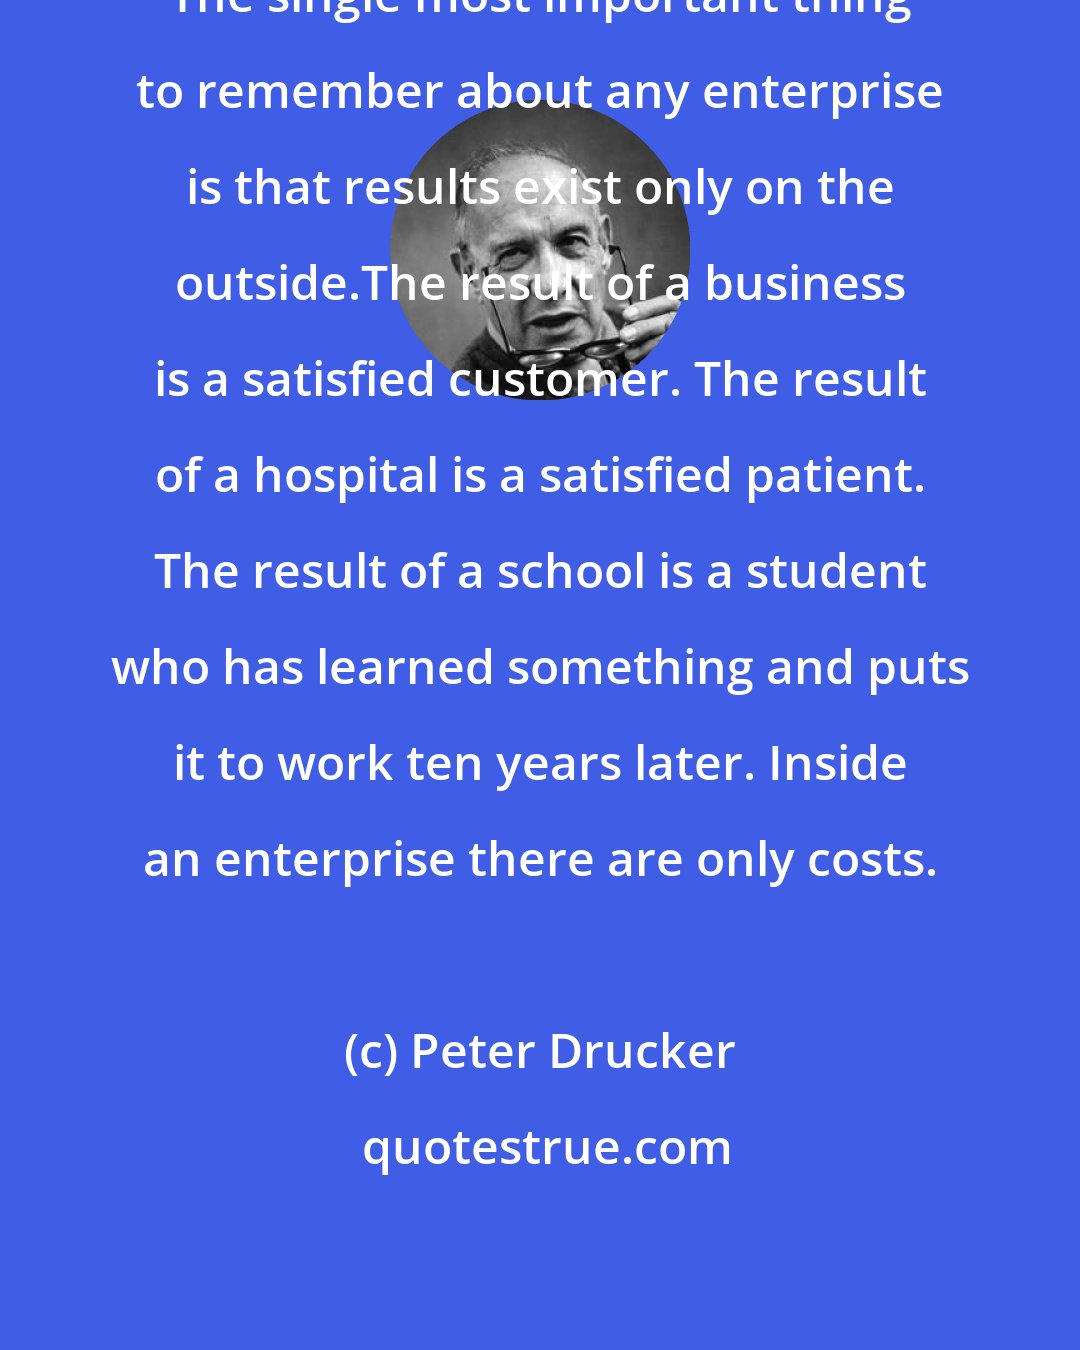 Peter Drucker: The single most important thing to remember about any enterprise is that results exist only on the outside.The result of a business is a satisfied customer. The result of a hospital is a satisfied patient. The result of a school is a student who has learned something and puts it to work ten years later. Inside an enterprise there are only costs.